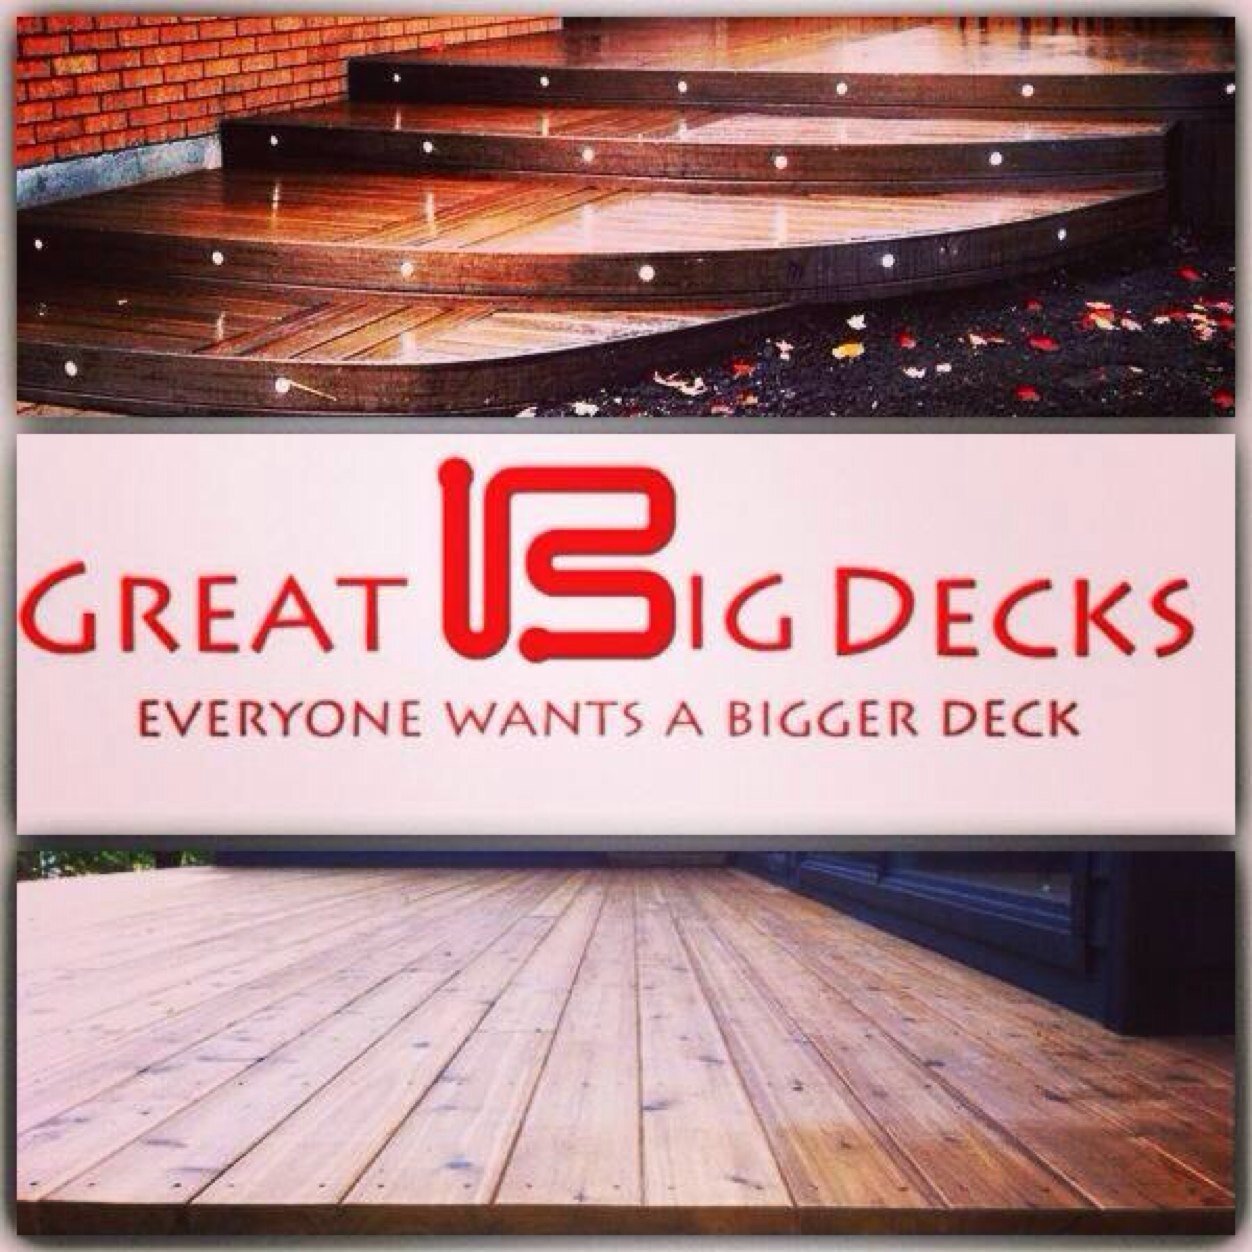 Great Big Decks is committed to providing quality deck design and build services at a fair market value. We specialize in Trex composite decking ! 705-623-DECK